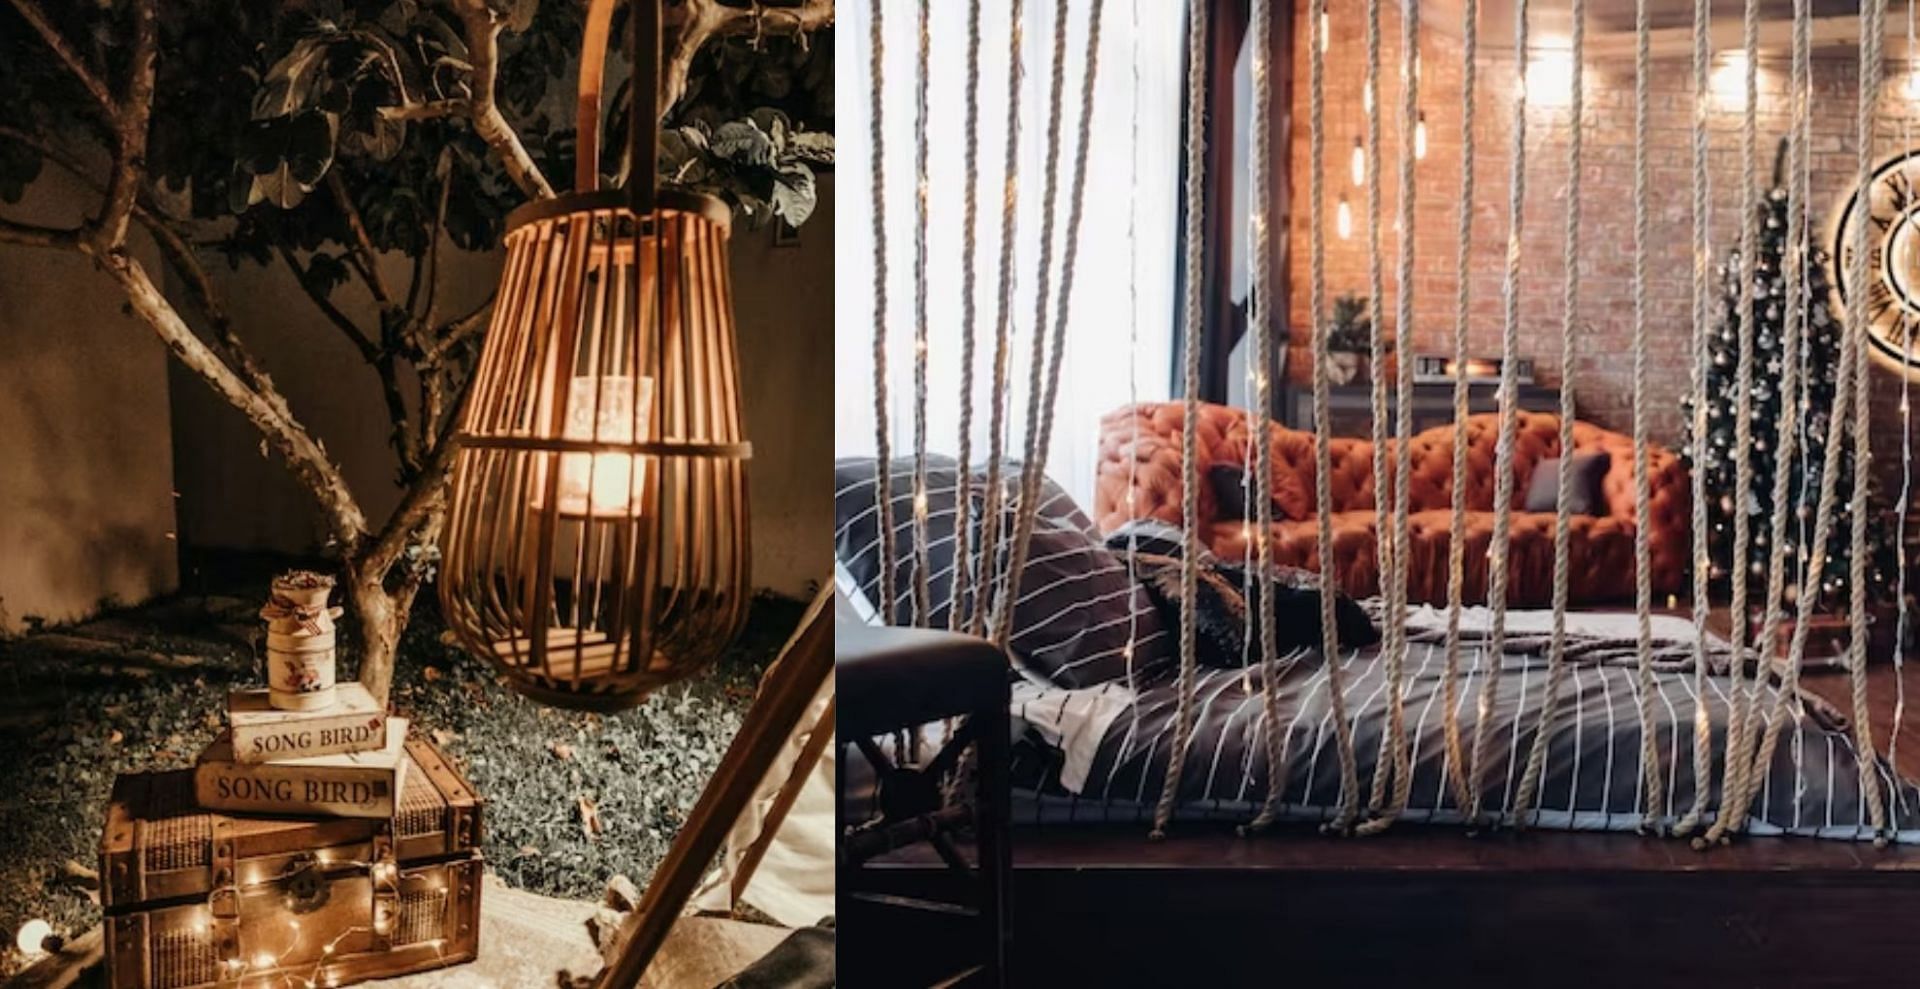 10 Rustic bedroom decor ideas you would love to explore